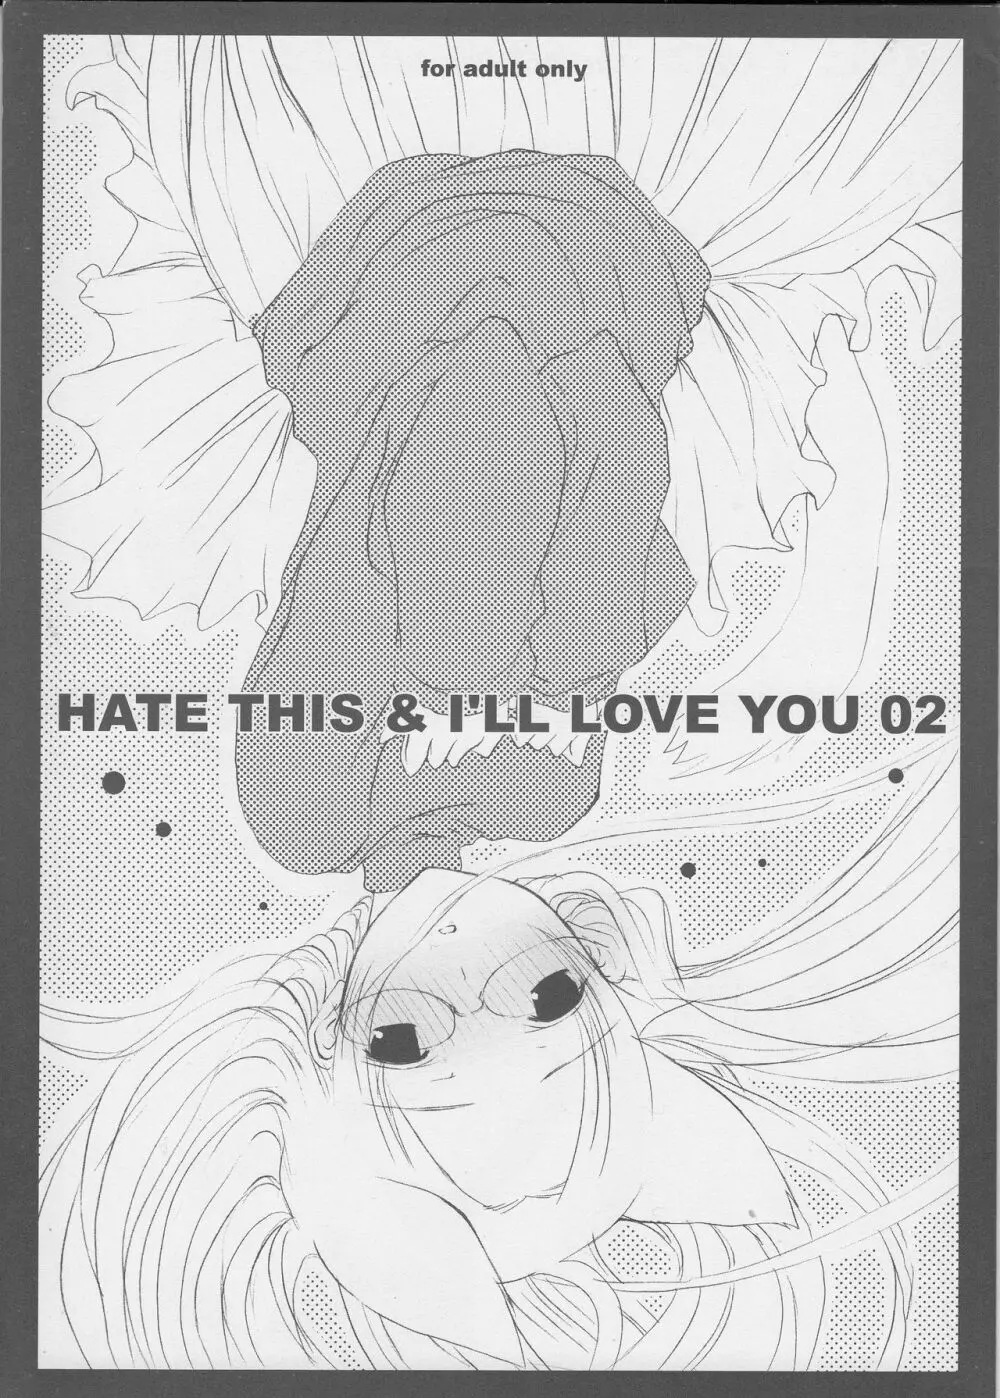 HATE THIS ＆ I’LL LOVE YOU 02 1ページ